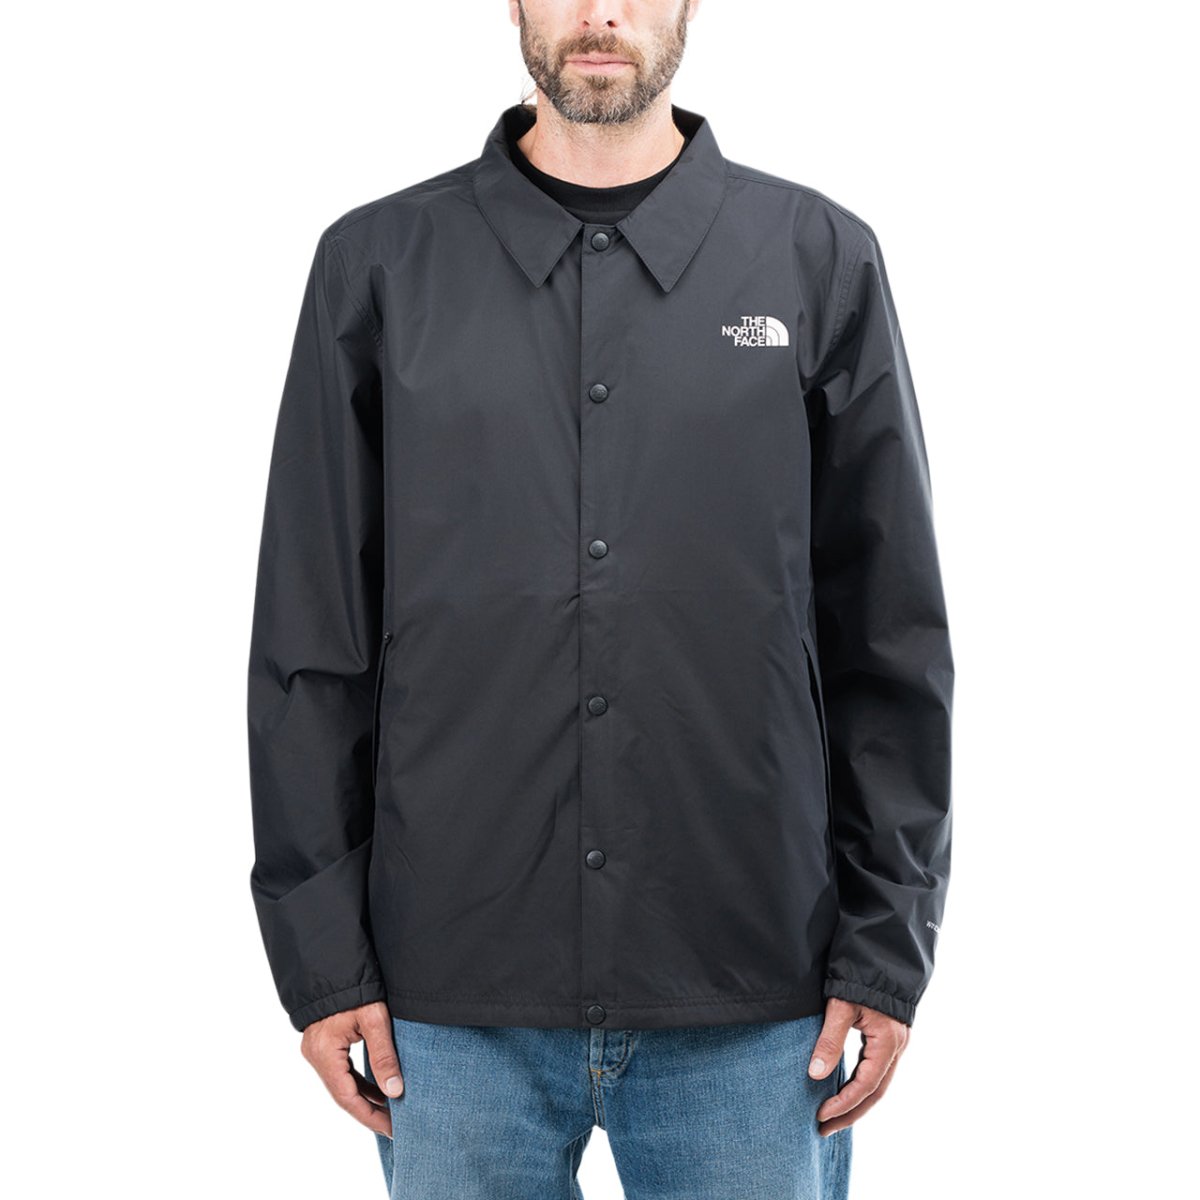 The North Face International Collection Coach Jacket (Black)